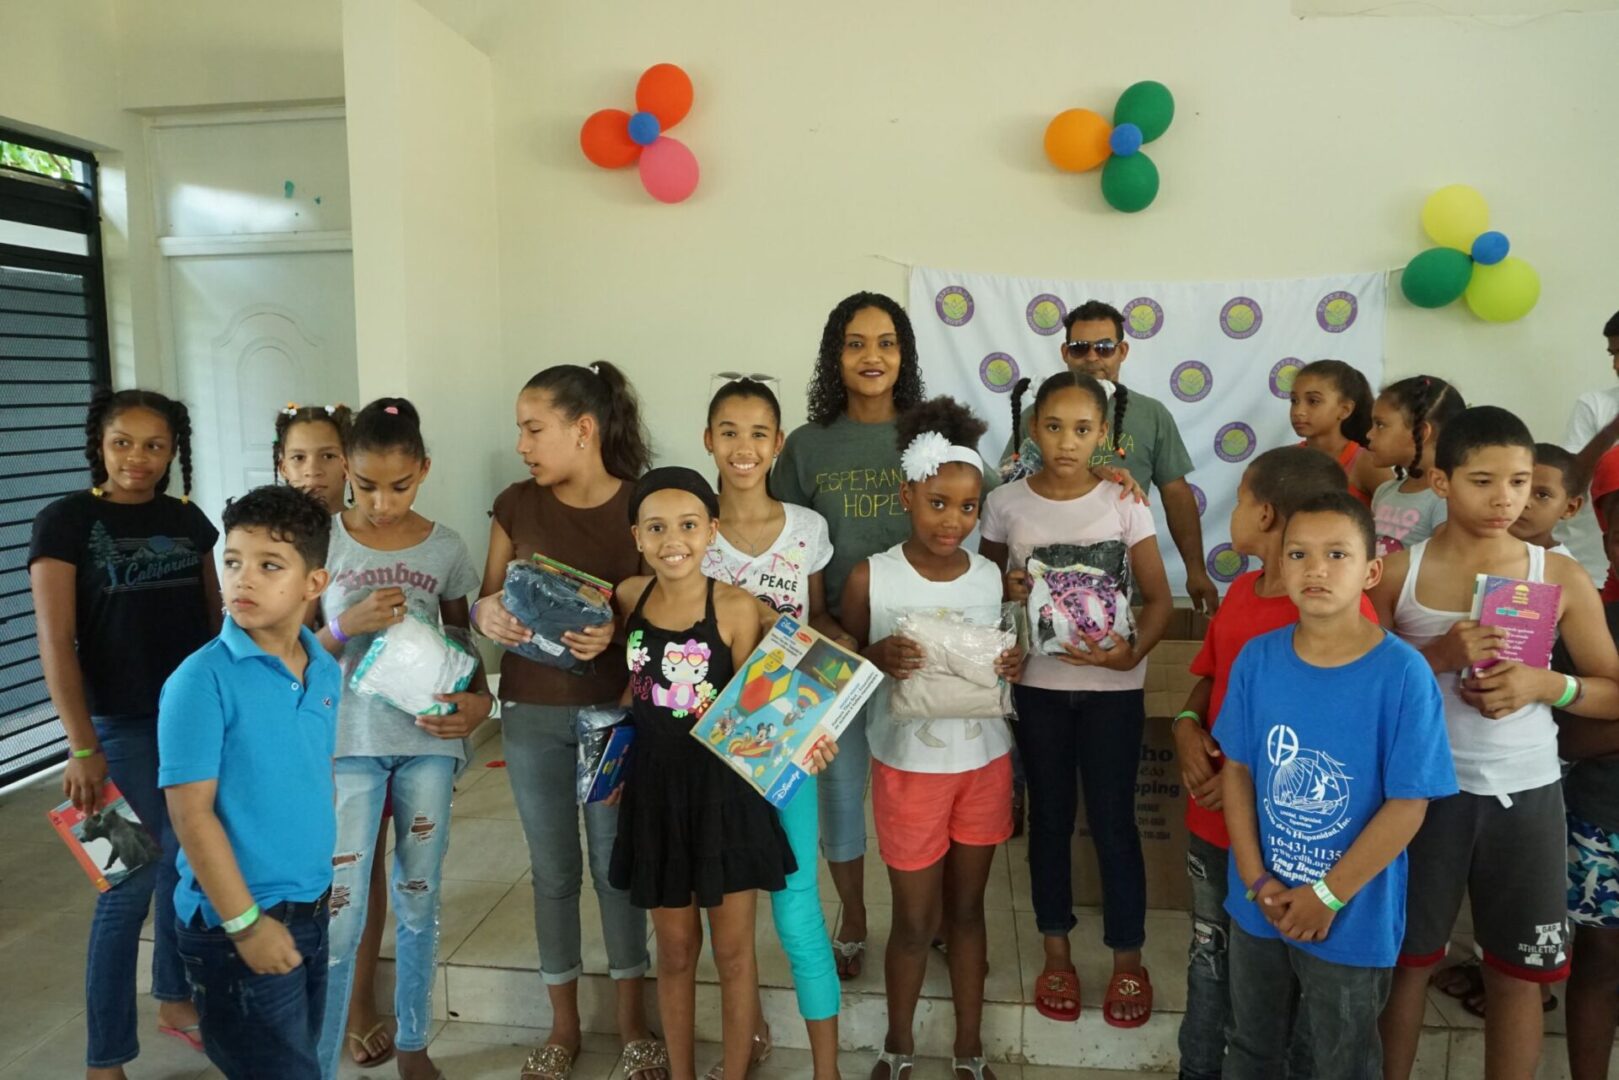 A group of girls and boys showing the gifts they received